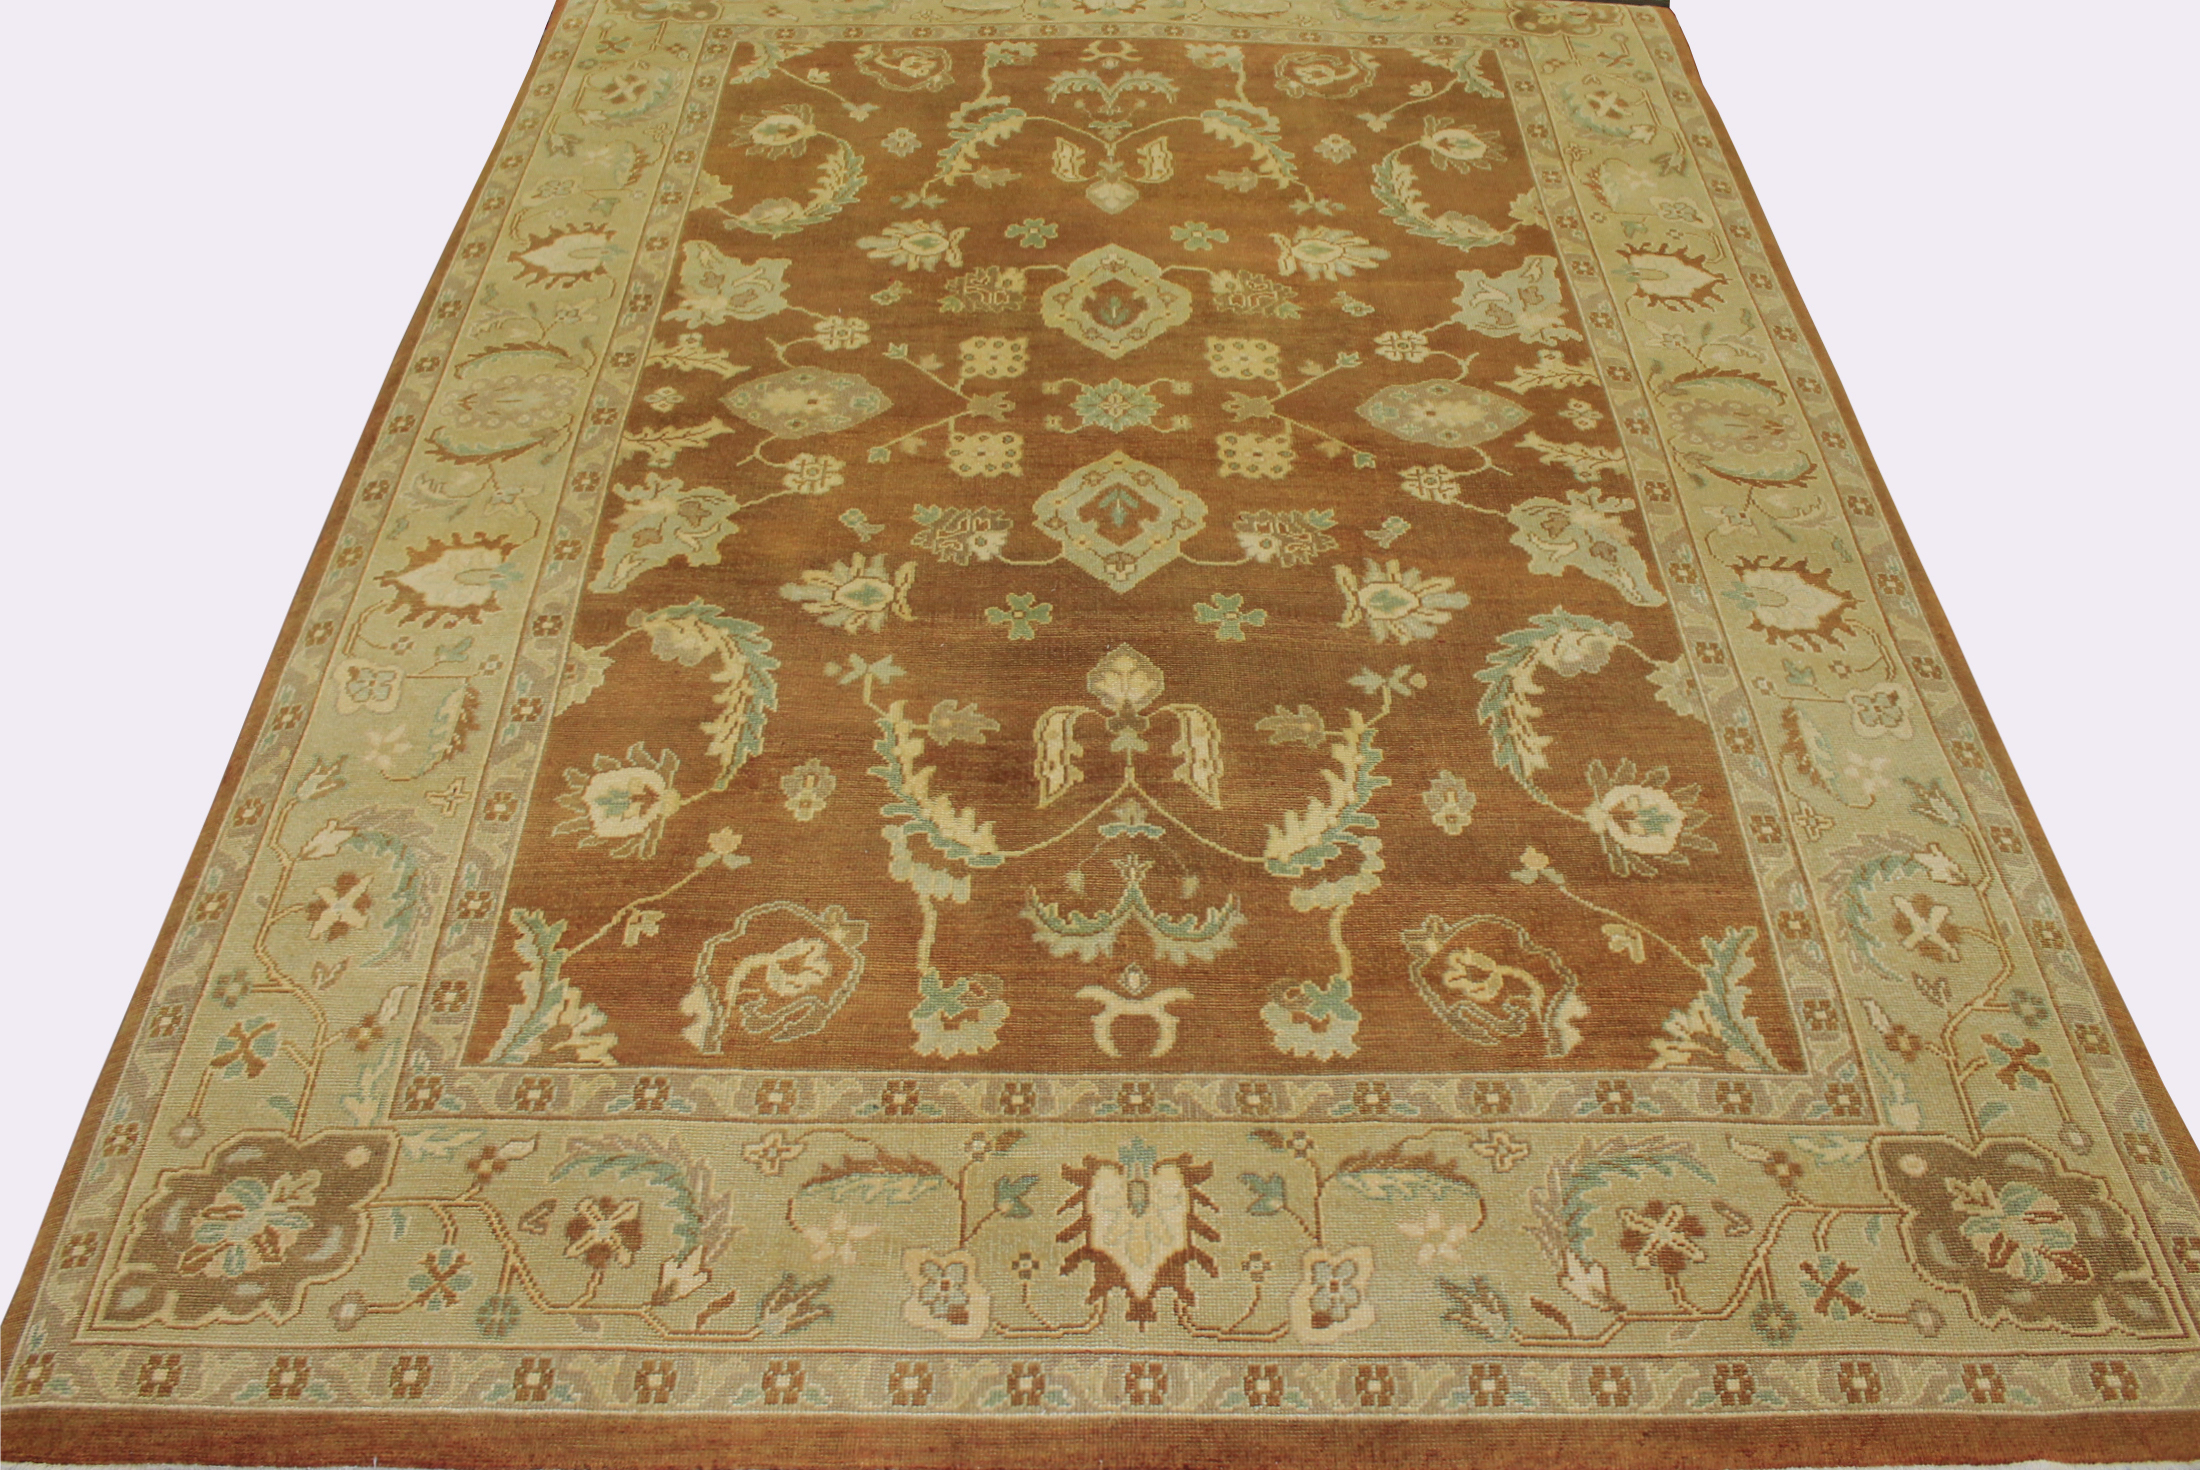 Clearance & Discount Rugs Oushak Hand Knotted Wool Area Rug 10020 Rust - Orange & Lt. Gold - Gold Hand Knotted Rug